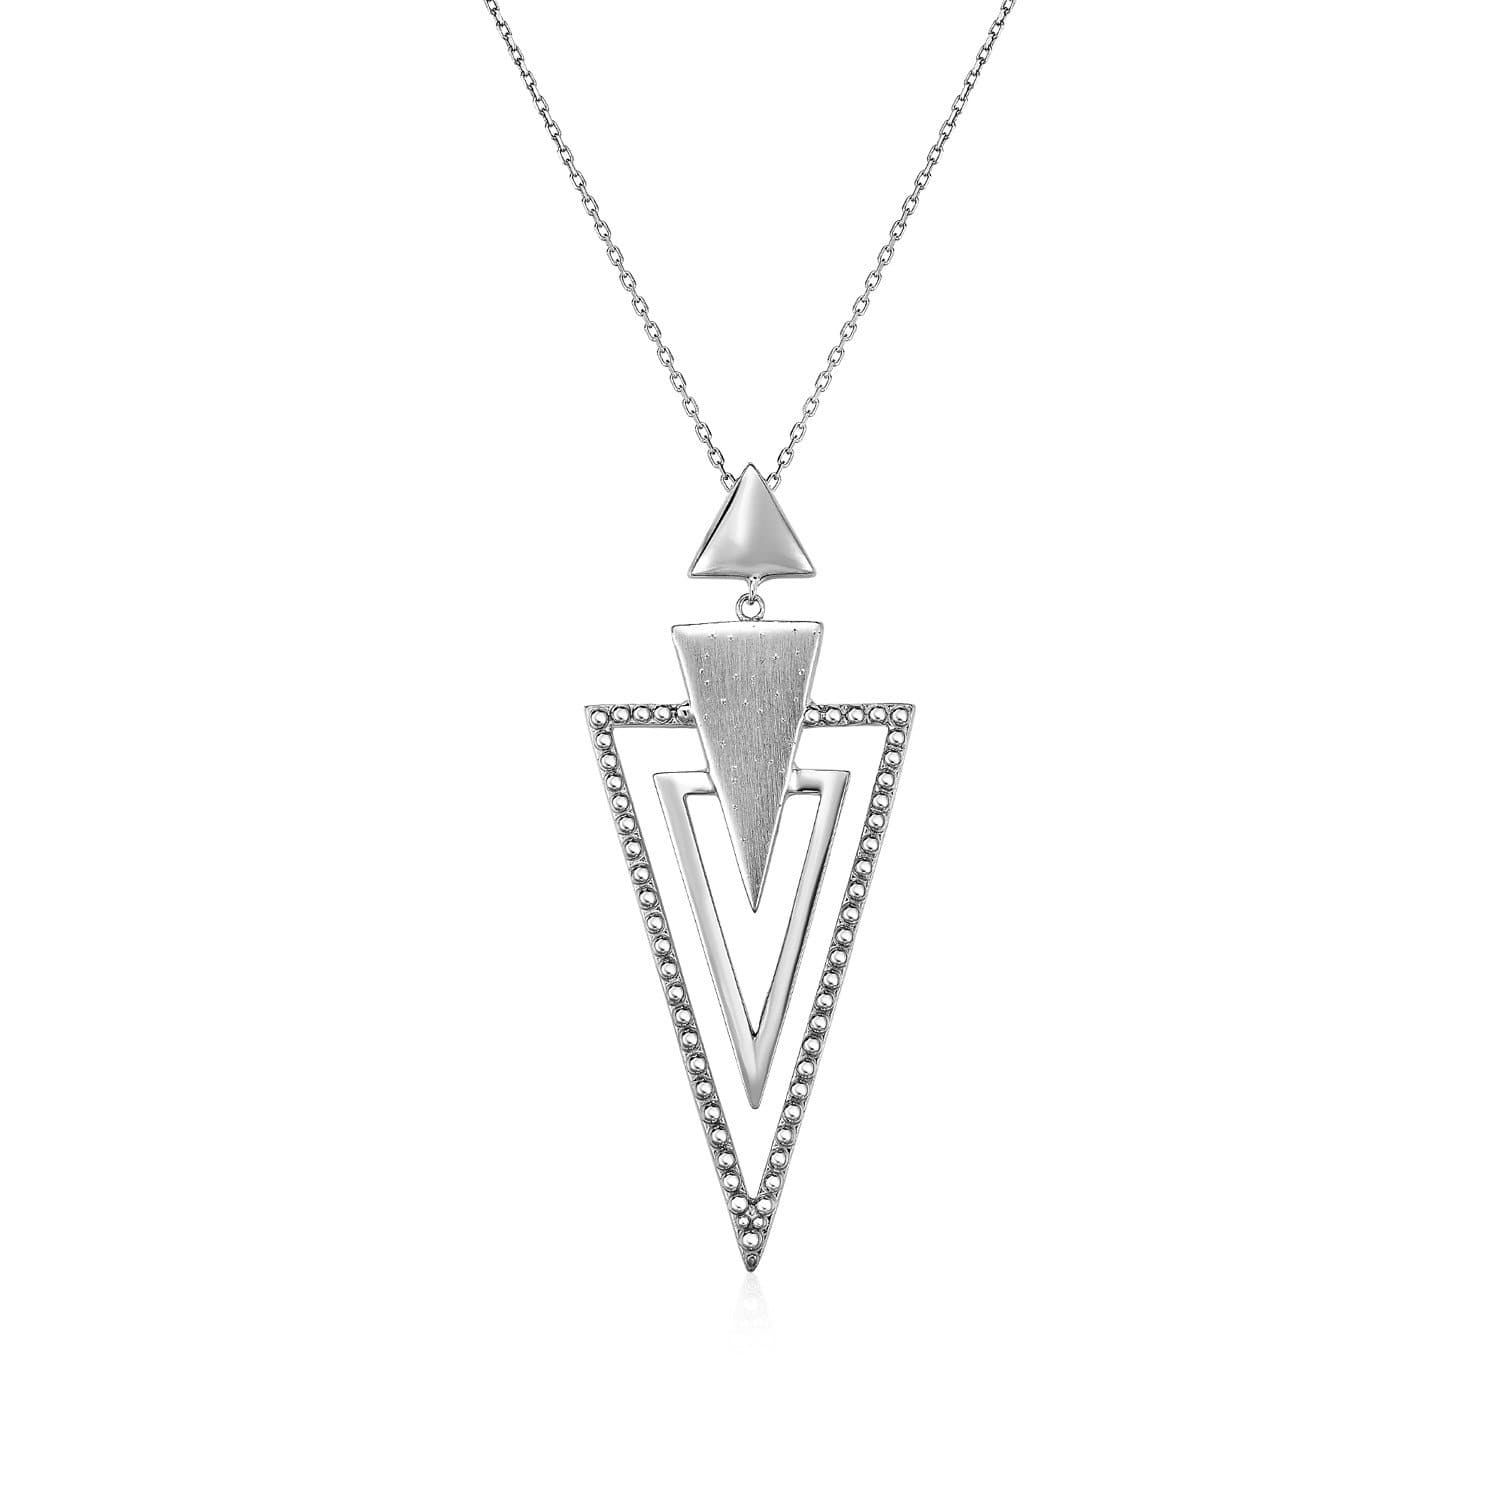 Graduated Textured Triangle Pendant in Sterling Silver